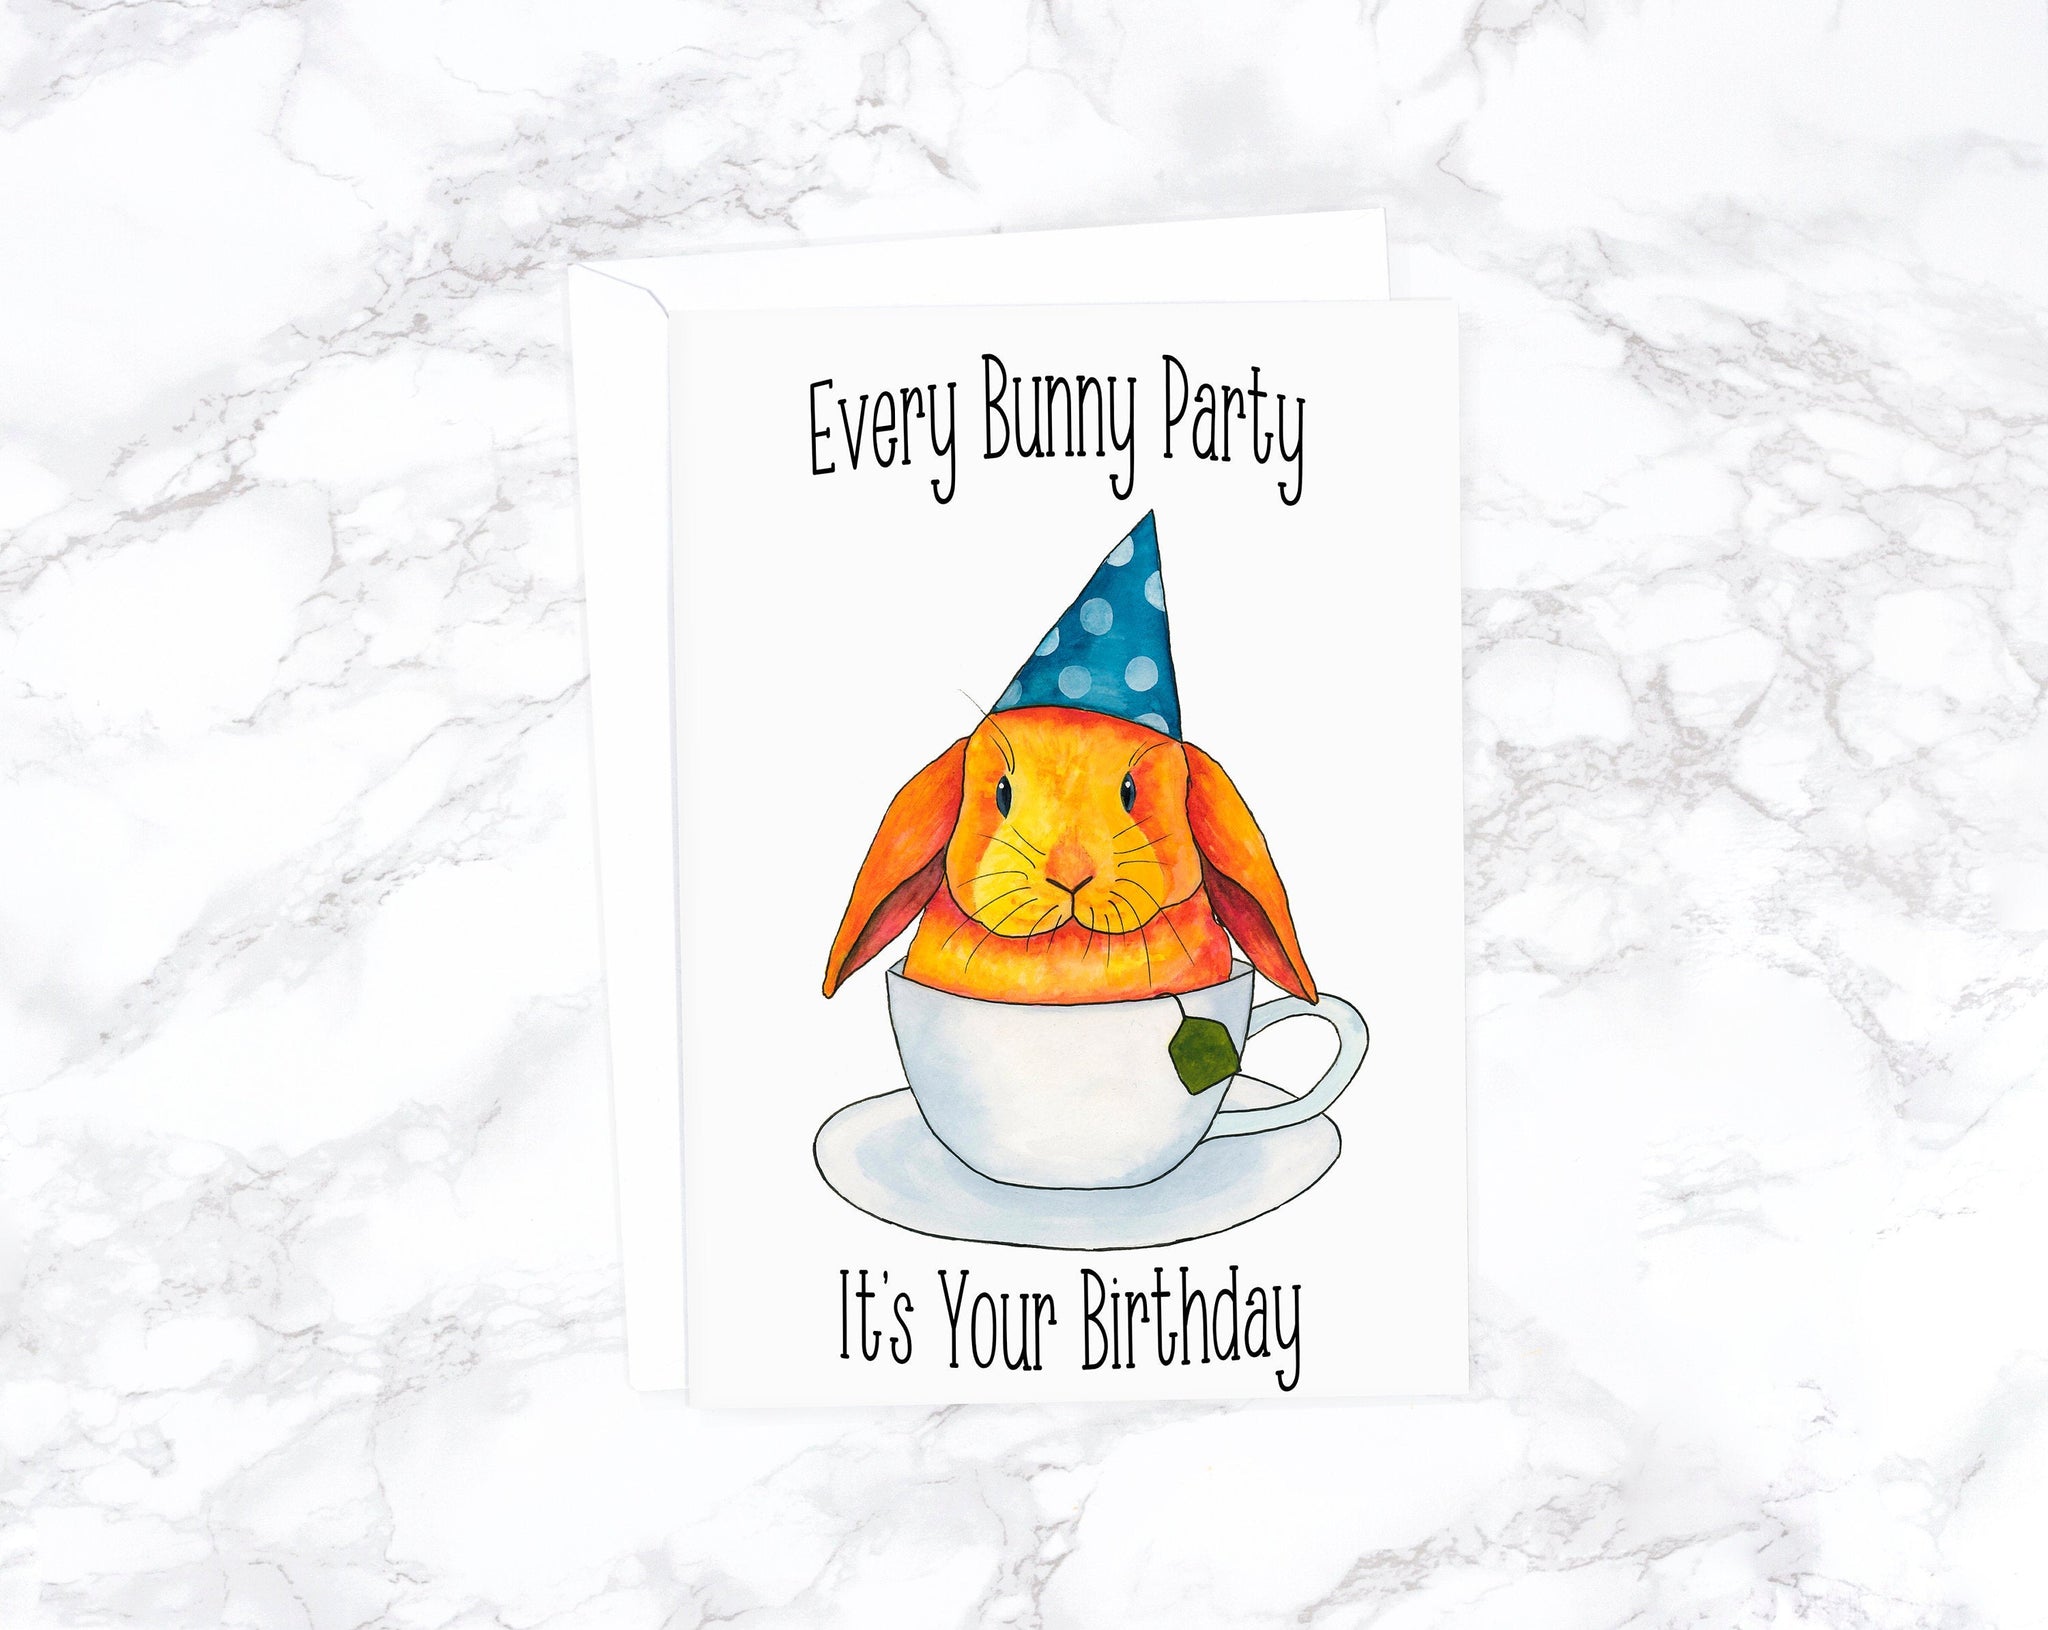 Every Bunny Party It's Your Birthday